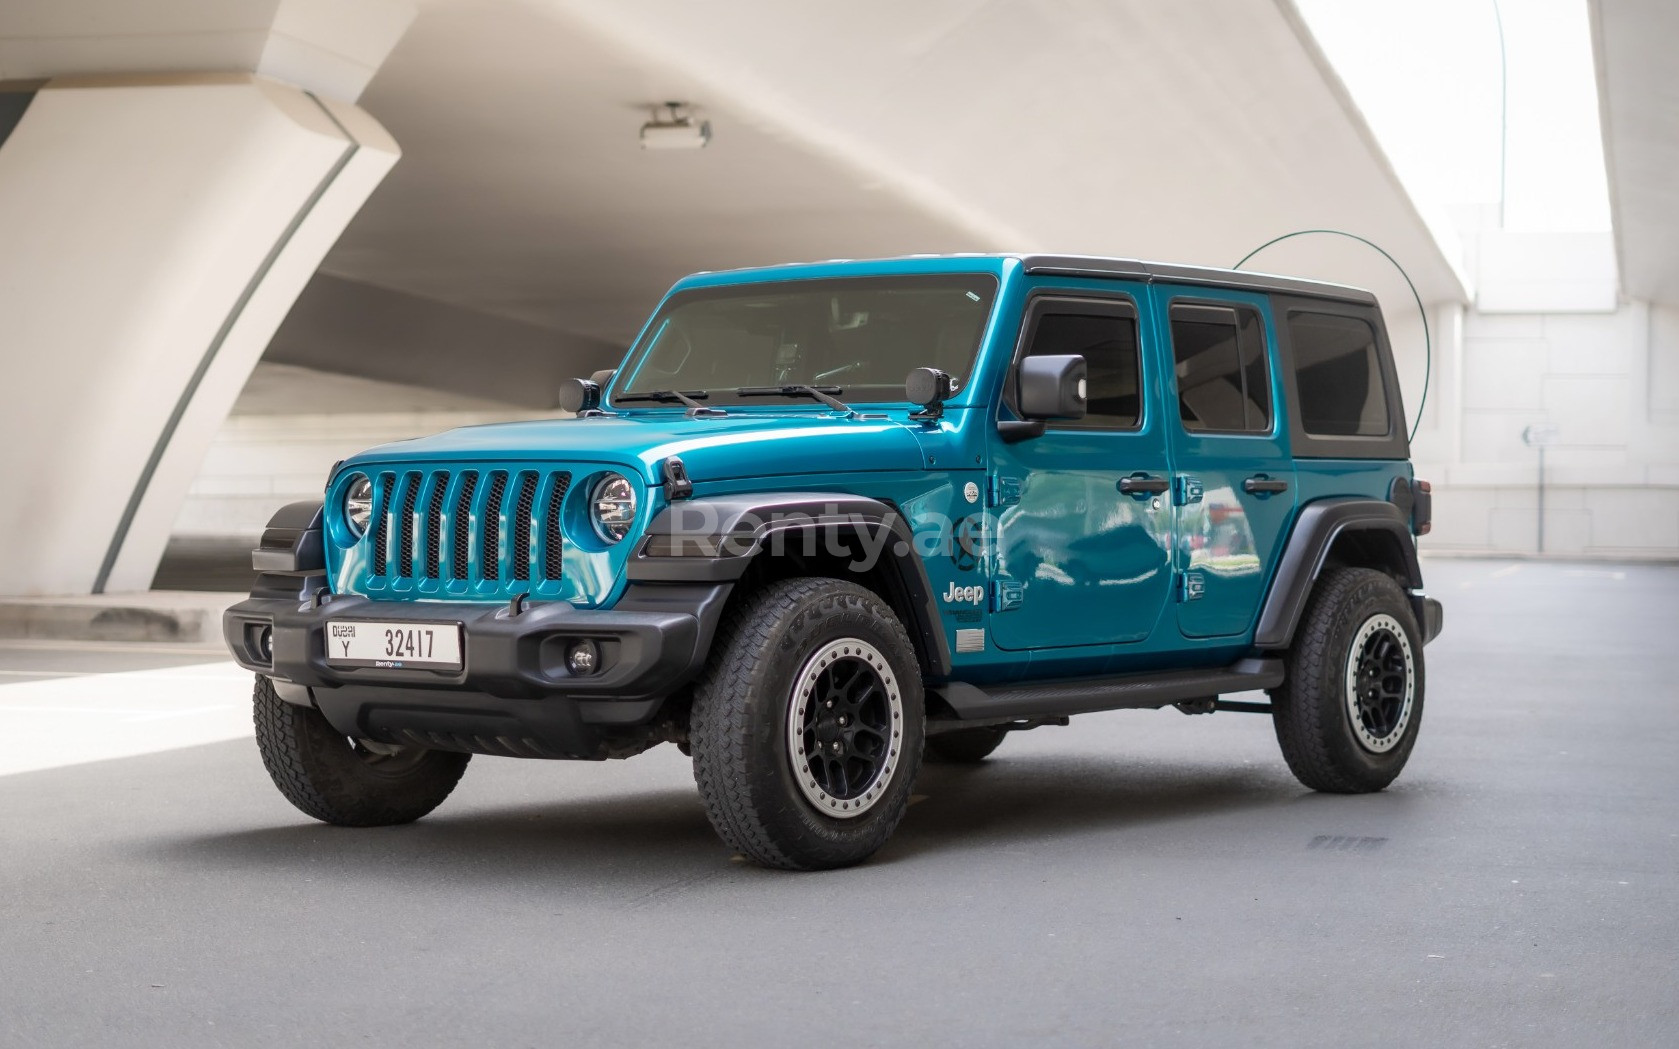 Rent a Jeep Wrangler Limited Sport Edition convertible (Blue), 2020  ID-04829, in Dubai 